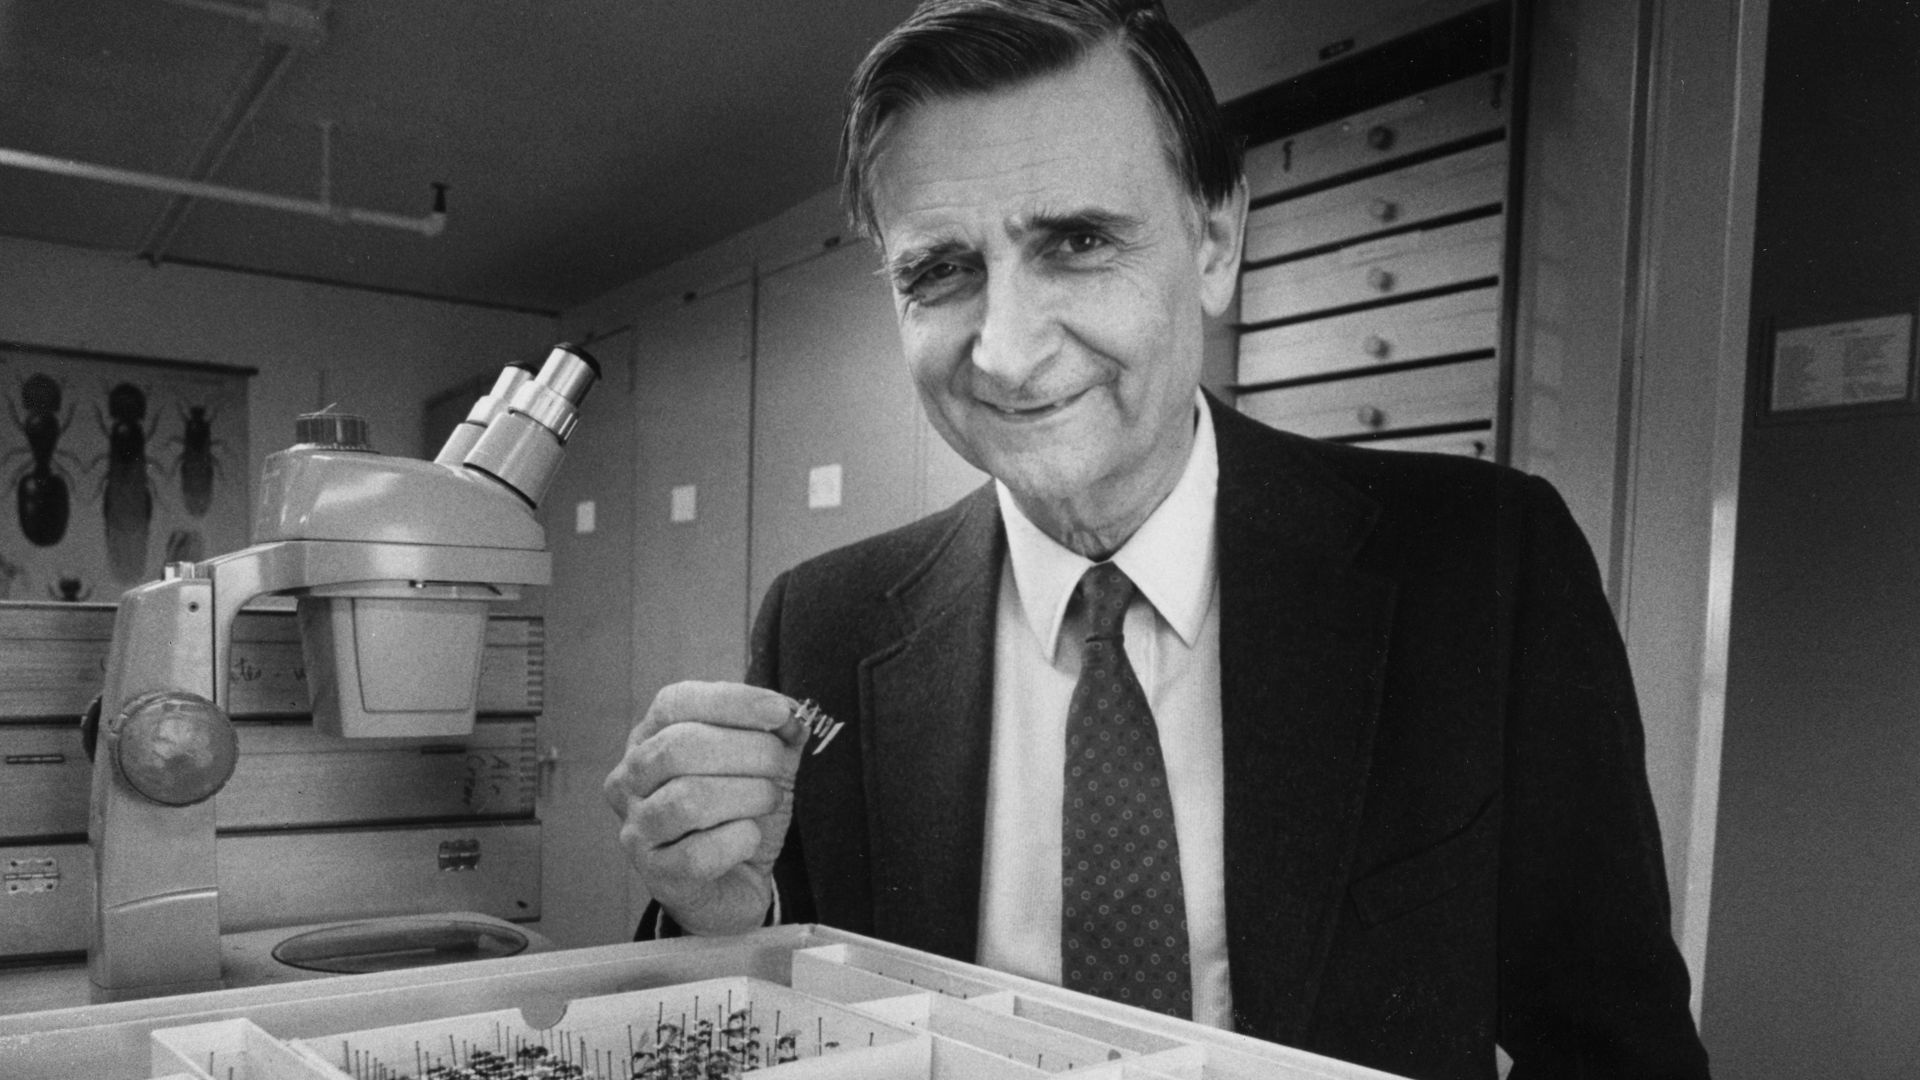 Edward O. Wilson, curator-teacher of the Harvard Museum of Comparative Zoology, poses for a portrait in the ant room on March 3, 1988.